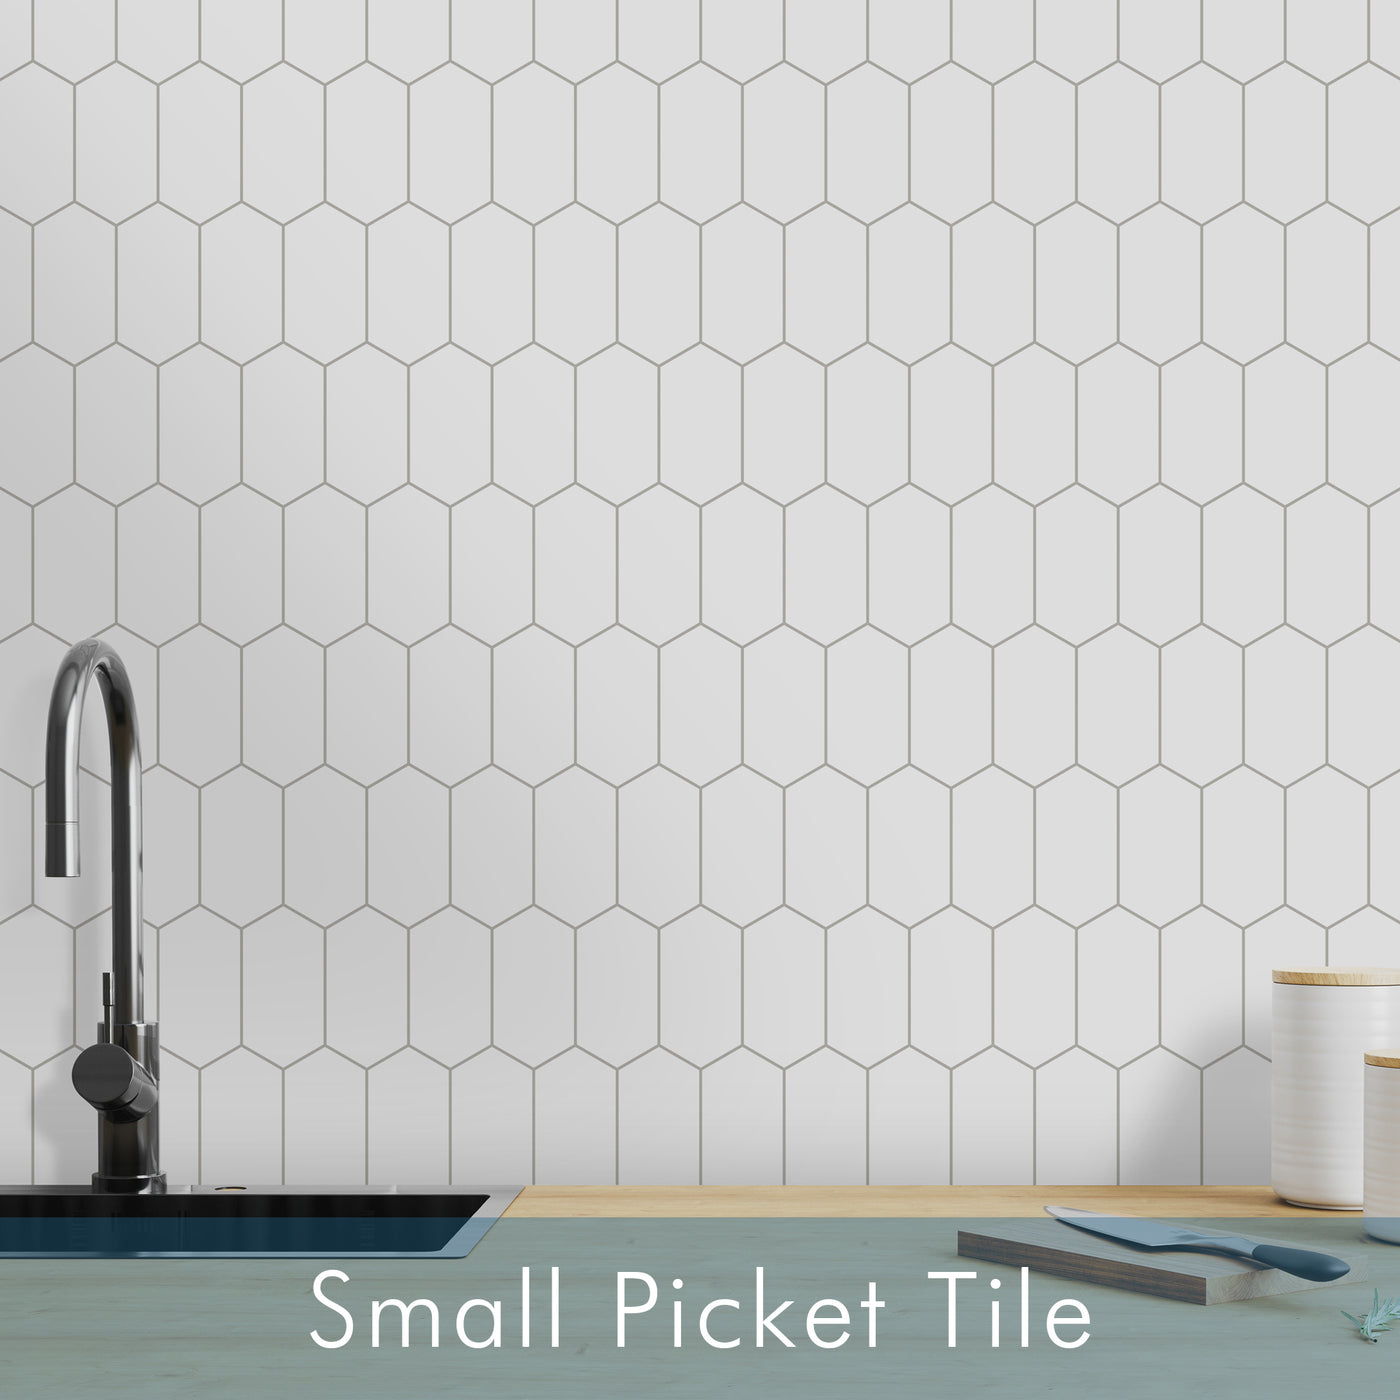 Small Picket Tile